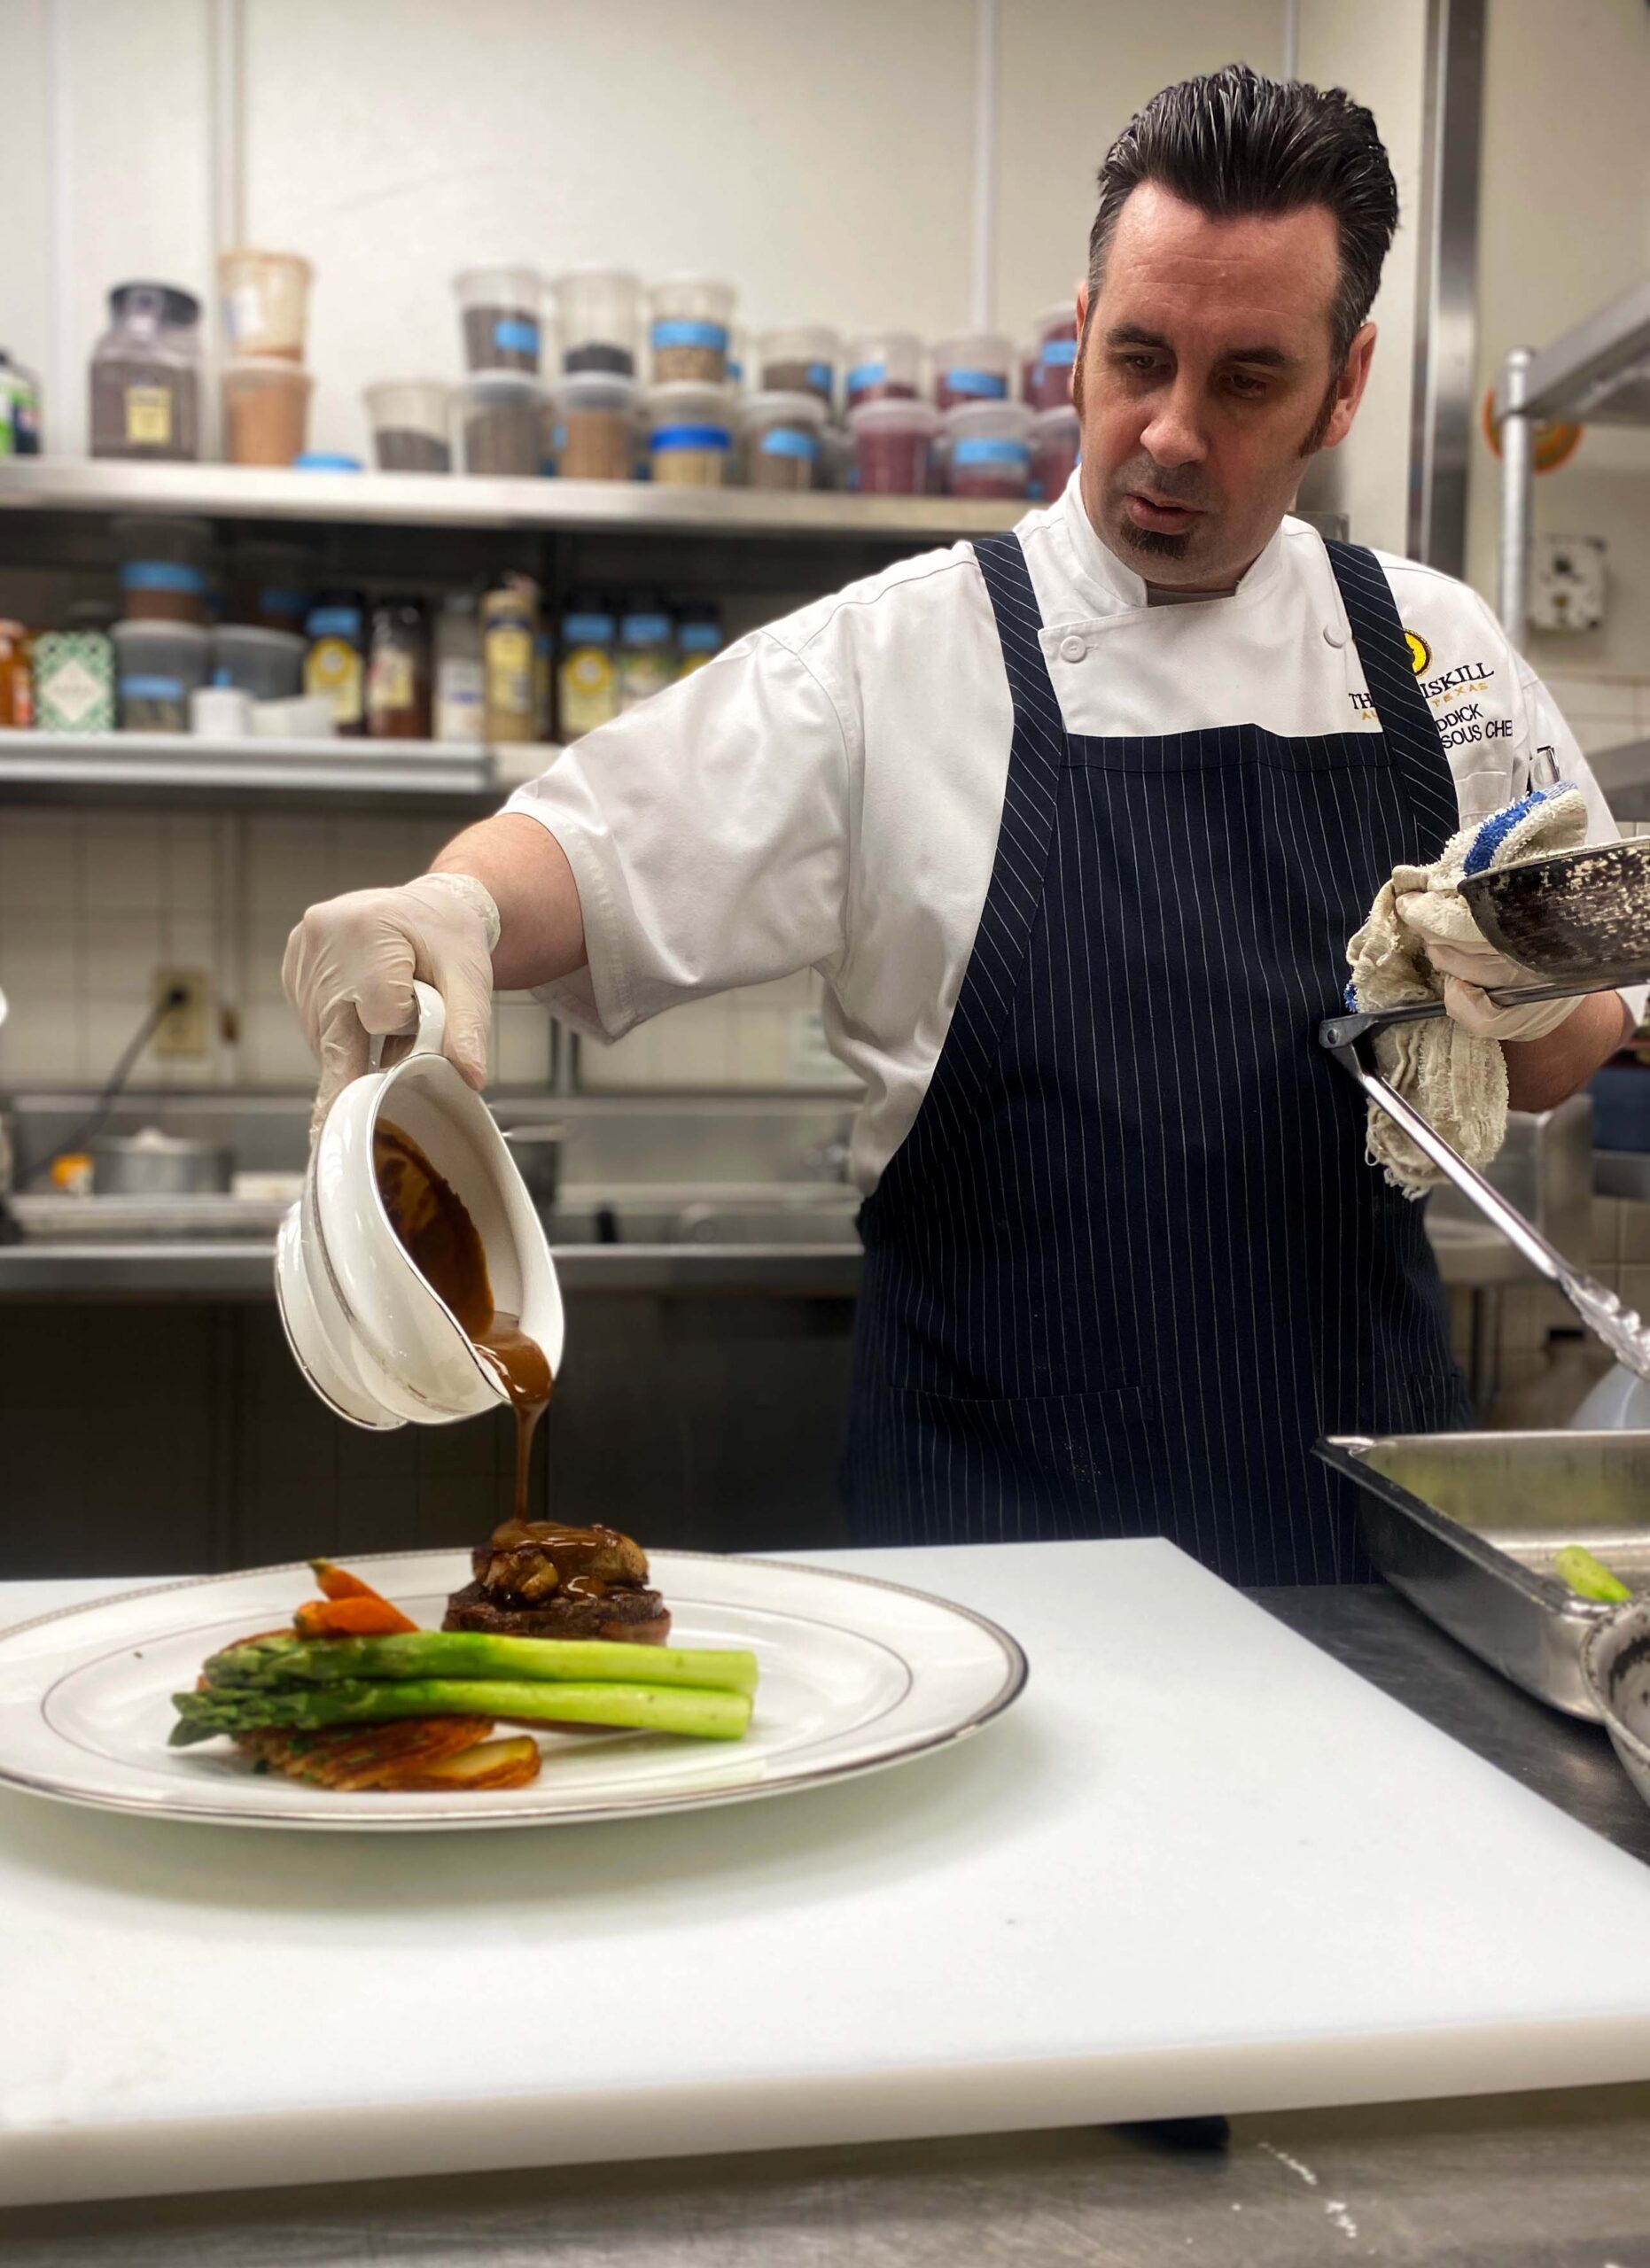 Sous Chef Iain pouring sauce over plated steak.